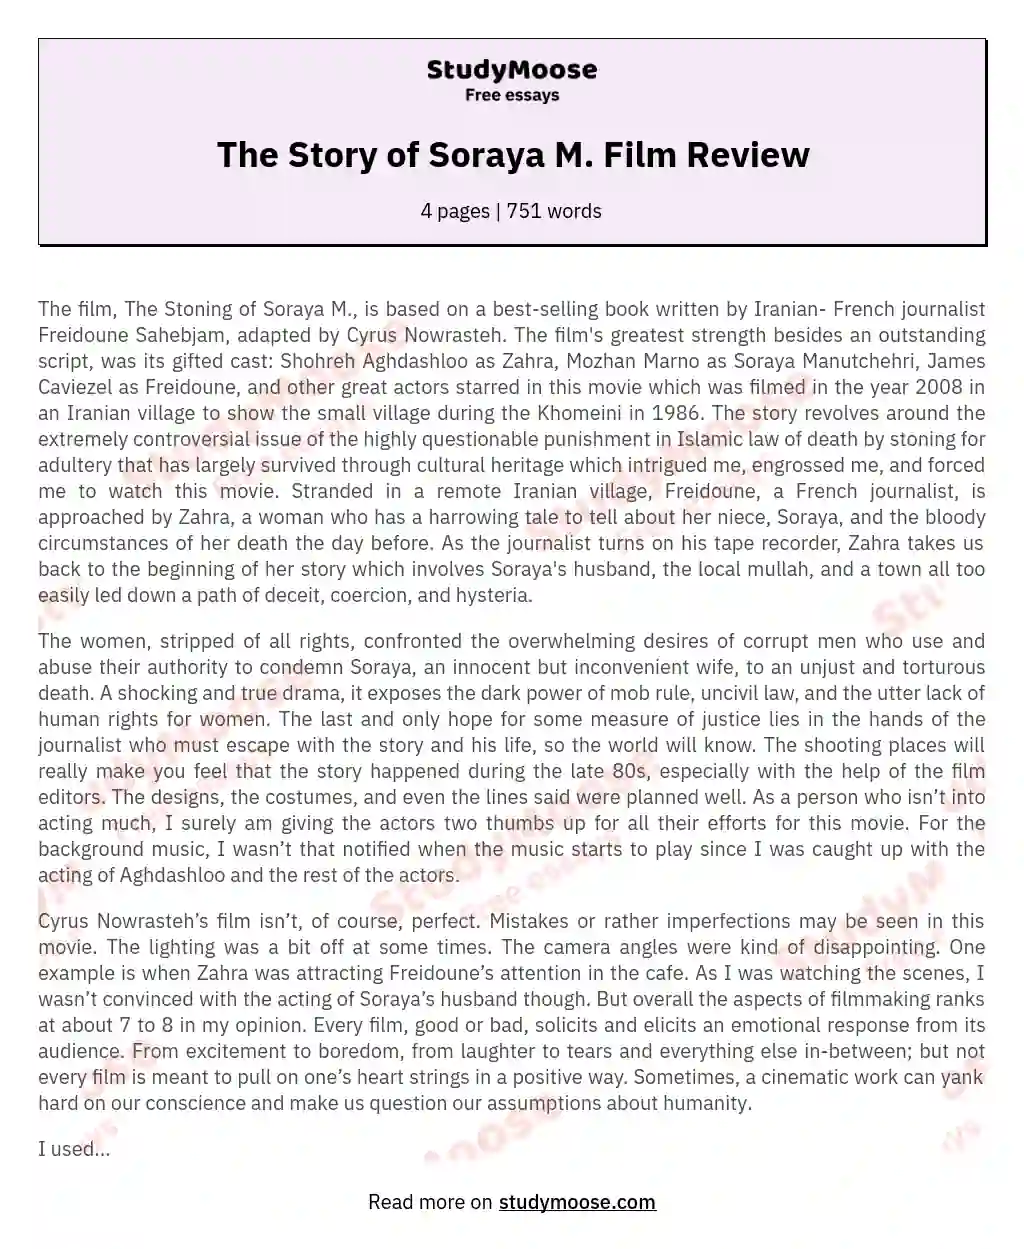 The Stoning of Soraya M.: A Cinematic Exploration of Injustice essay